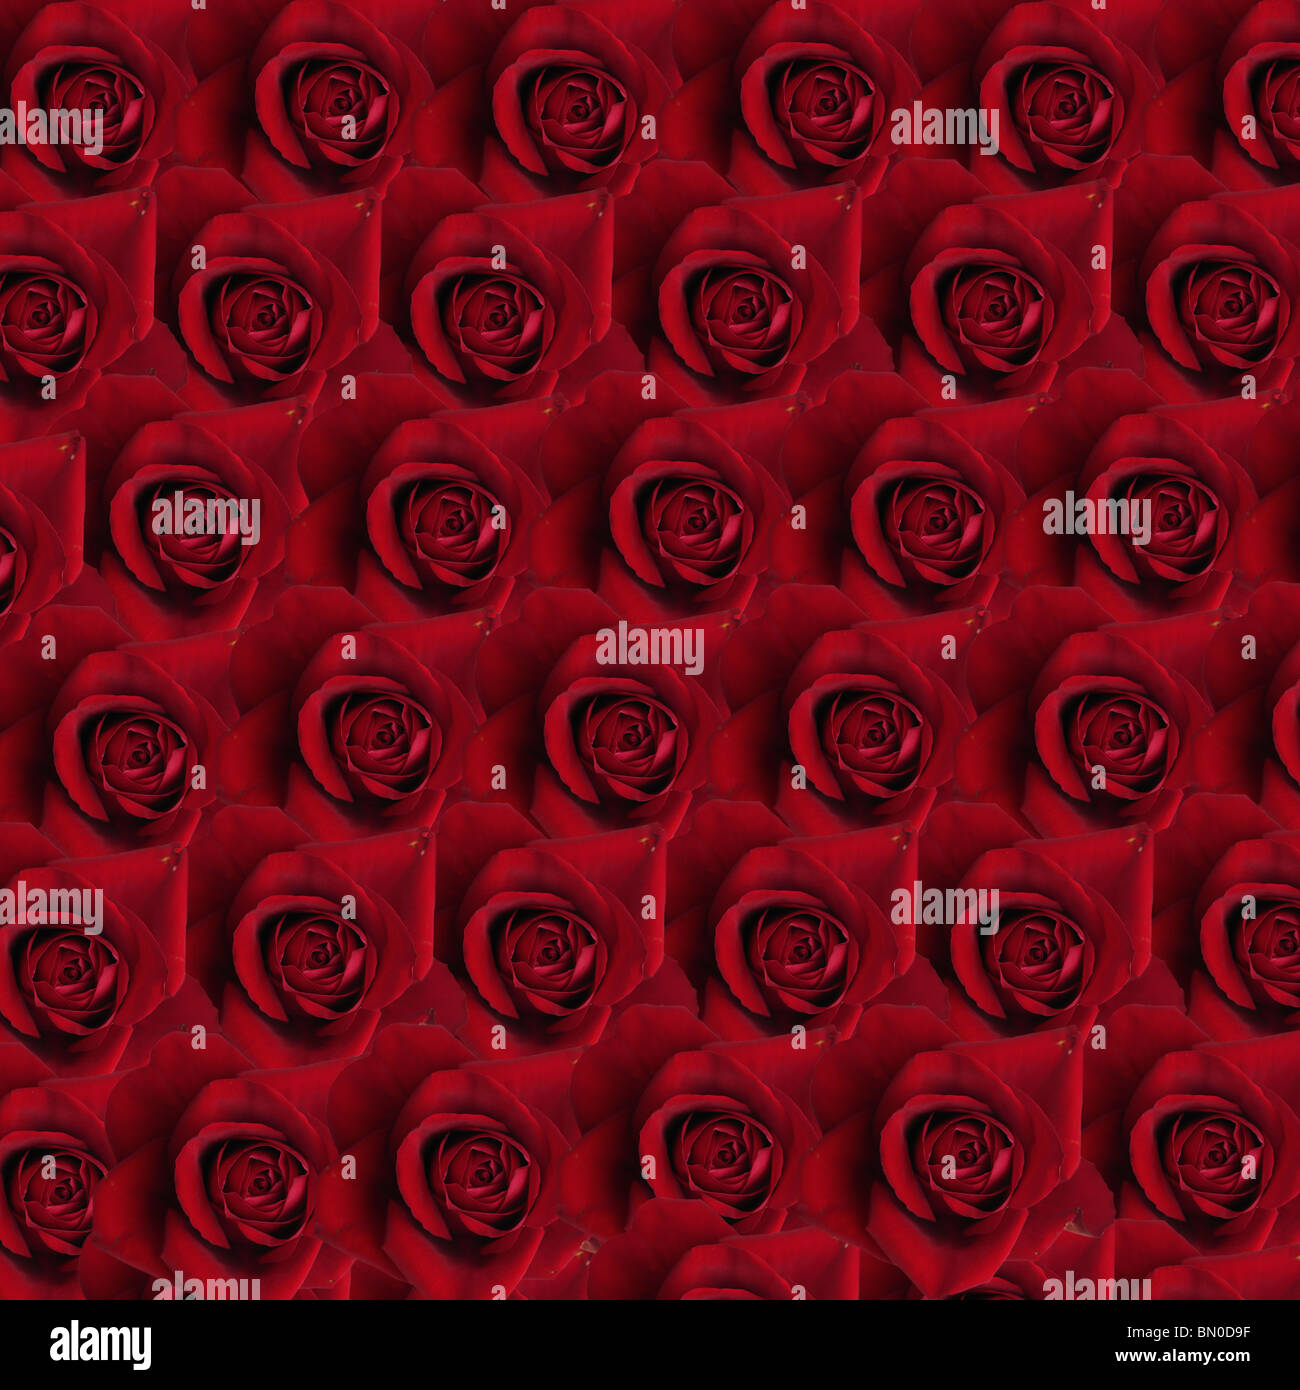 patchwork of 36 roses in red. Stock Photo